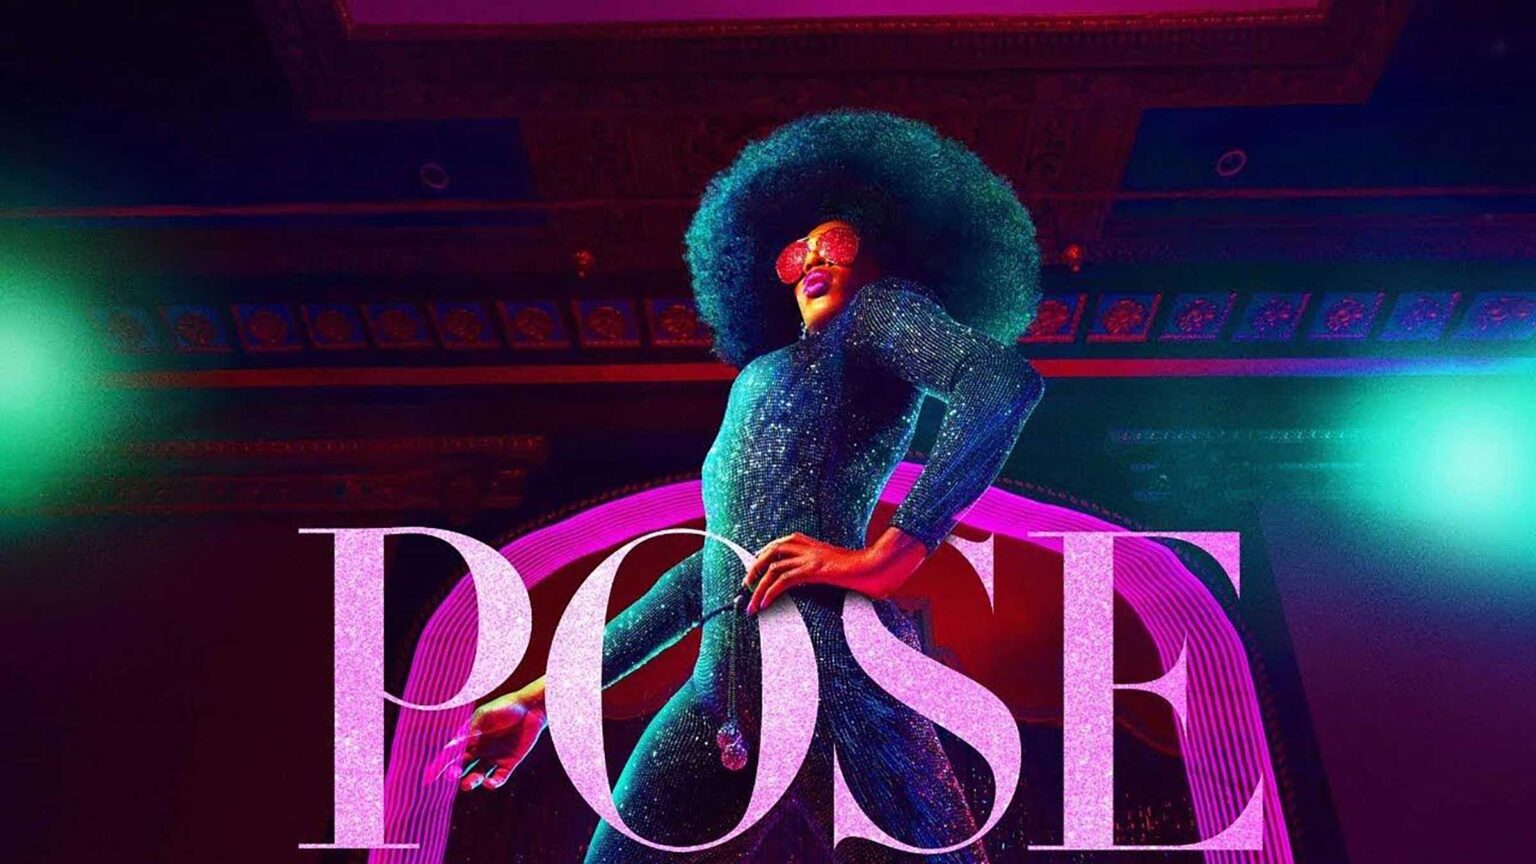 One of the newest and most energetic shows to come out this year is 'Legendary' on HBO. Here's why you should watch 'Pose' on FX instead.